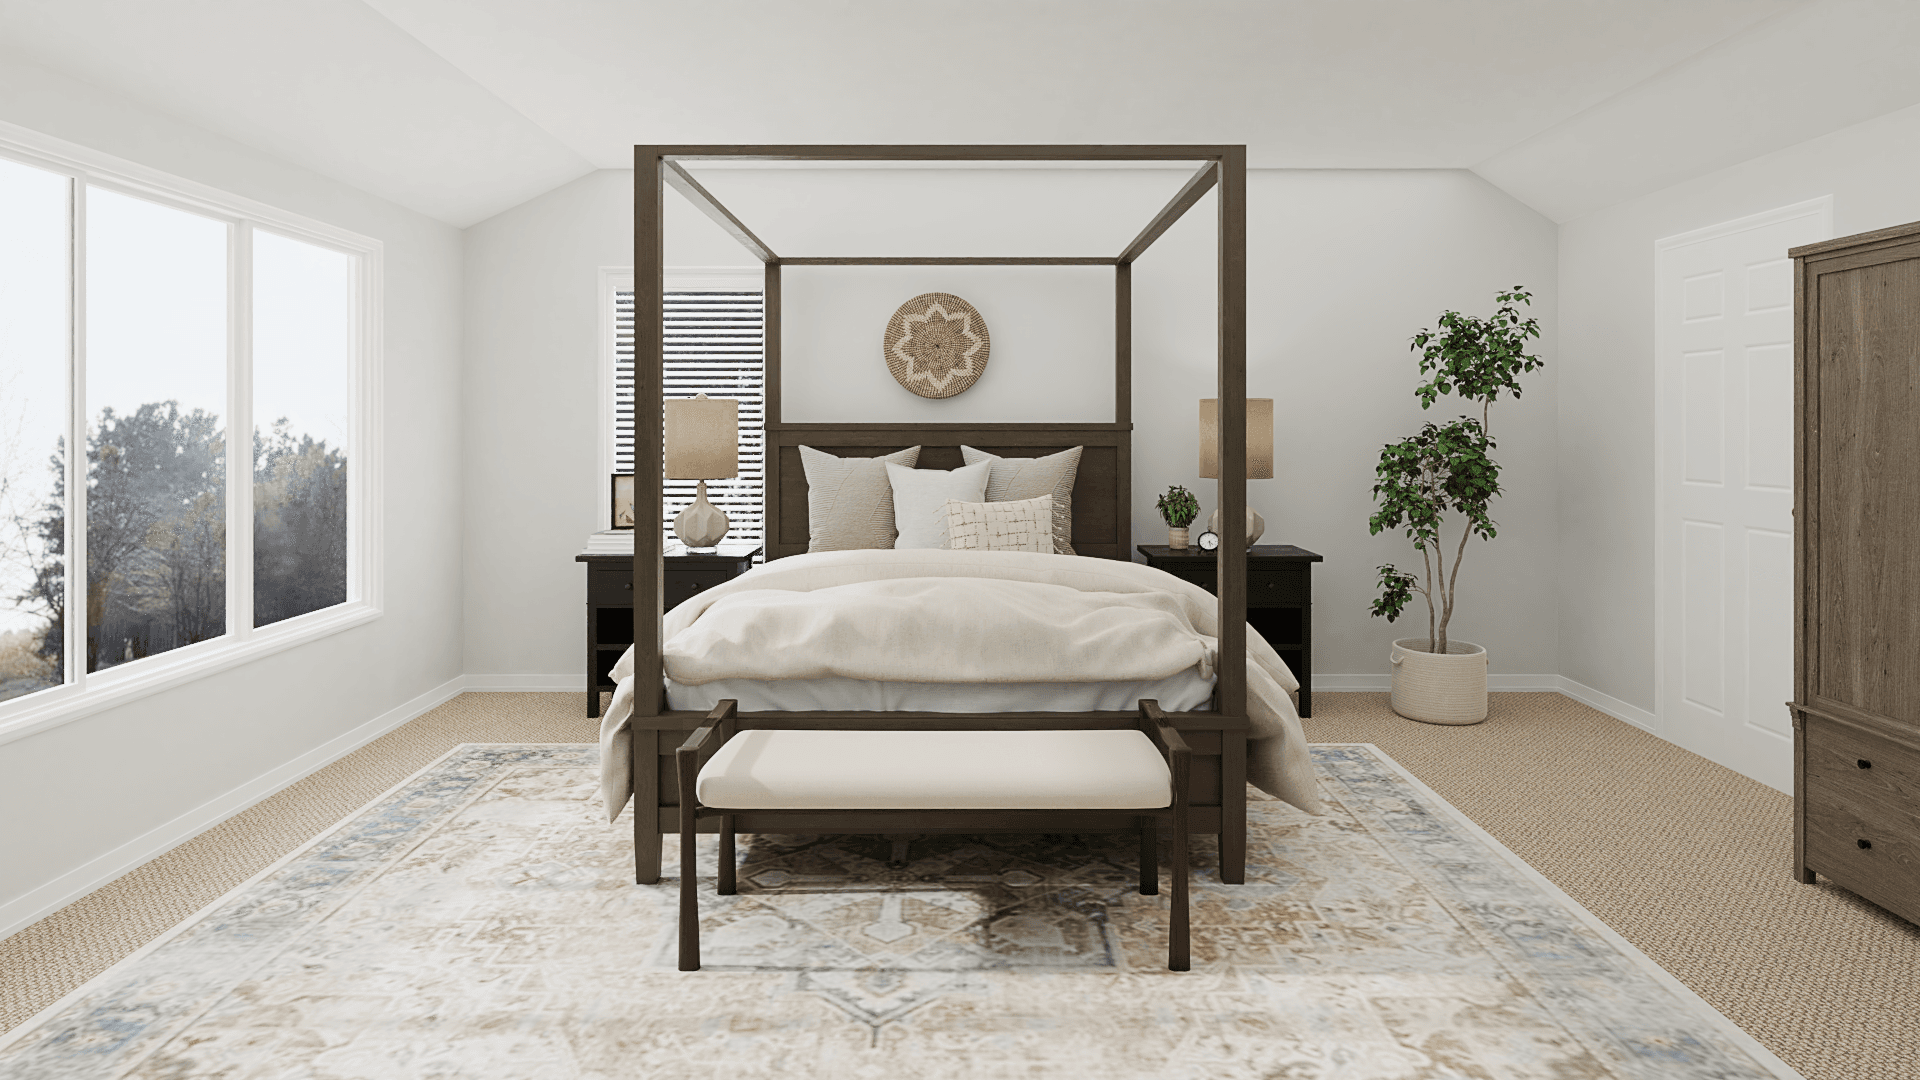 A Classic Canopy Bed In A Modern Bedroom